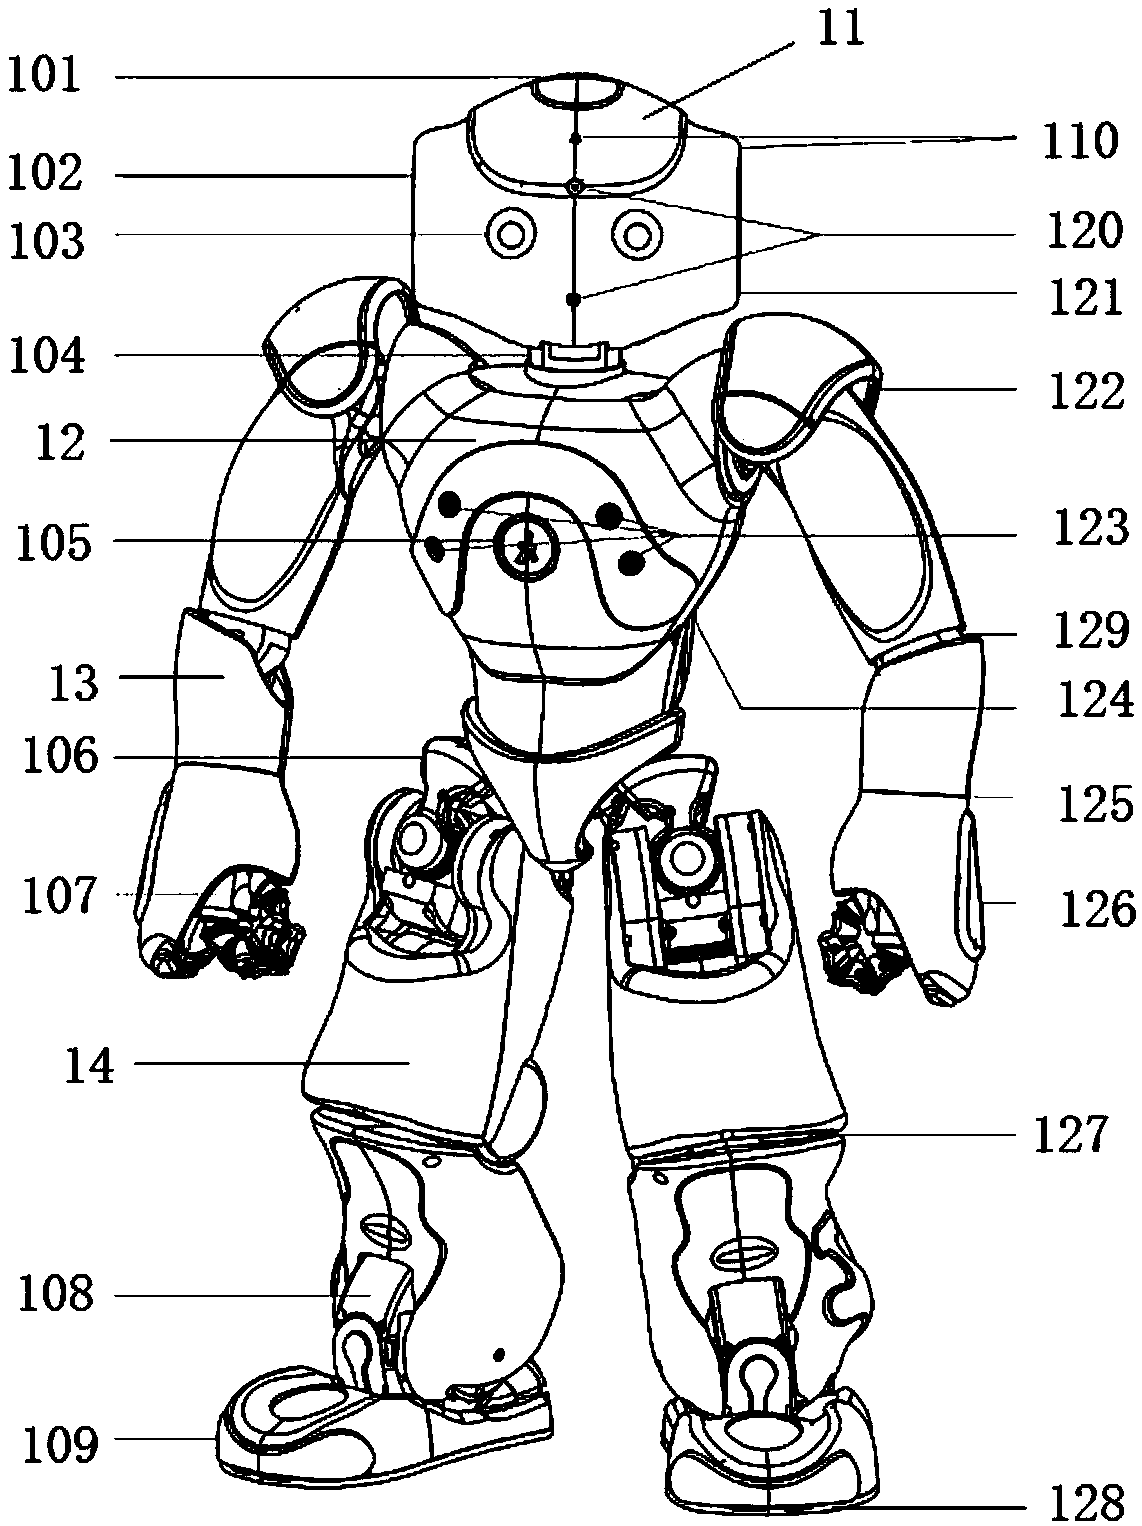 NAO robot system based on action collection